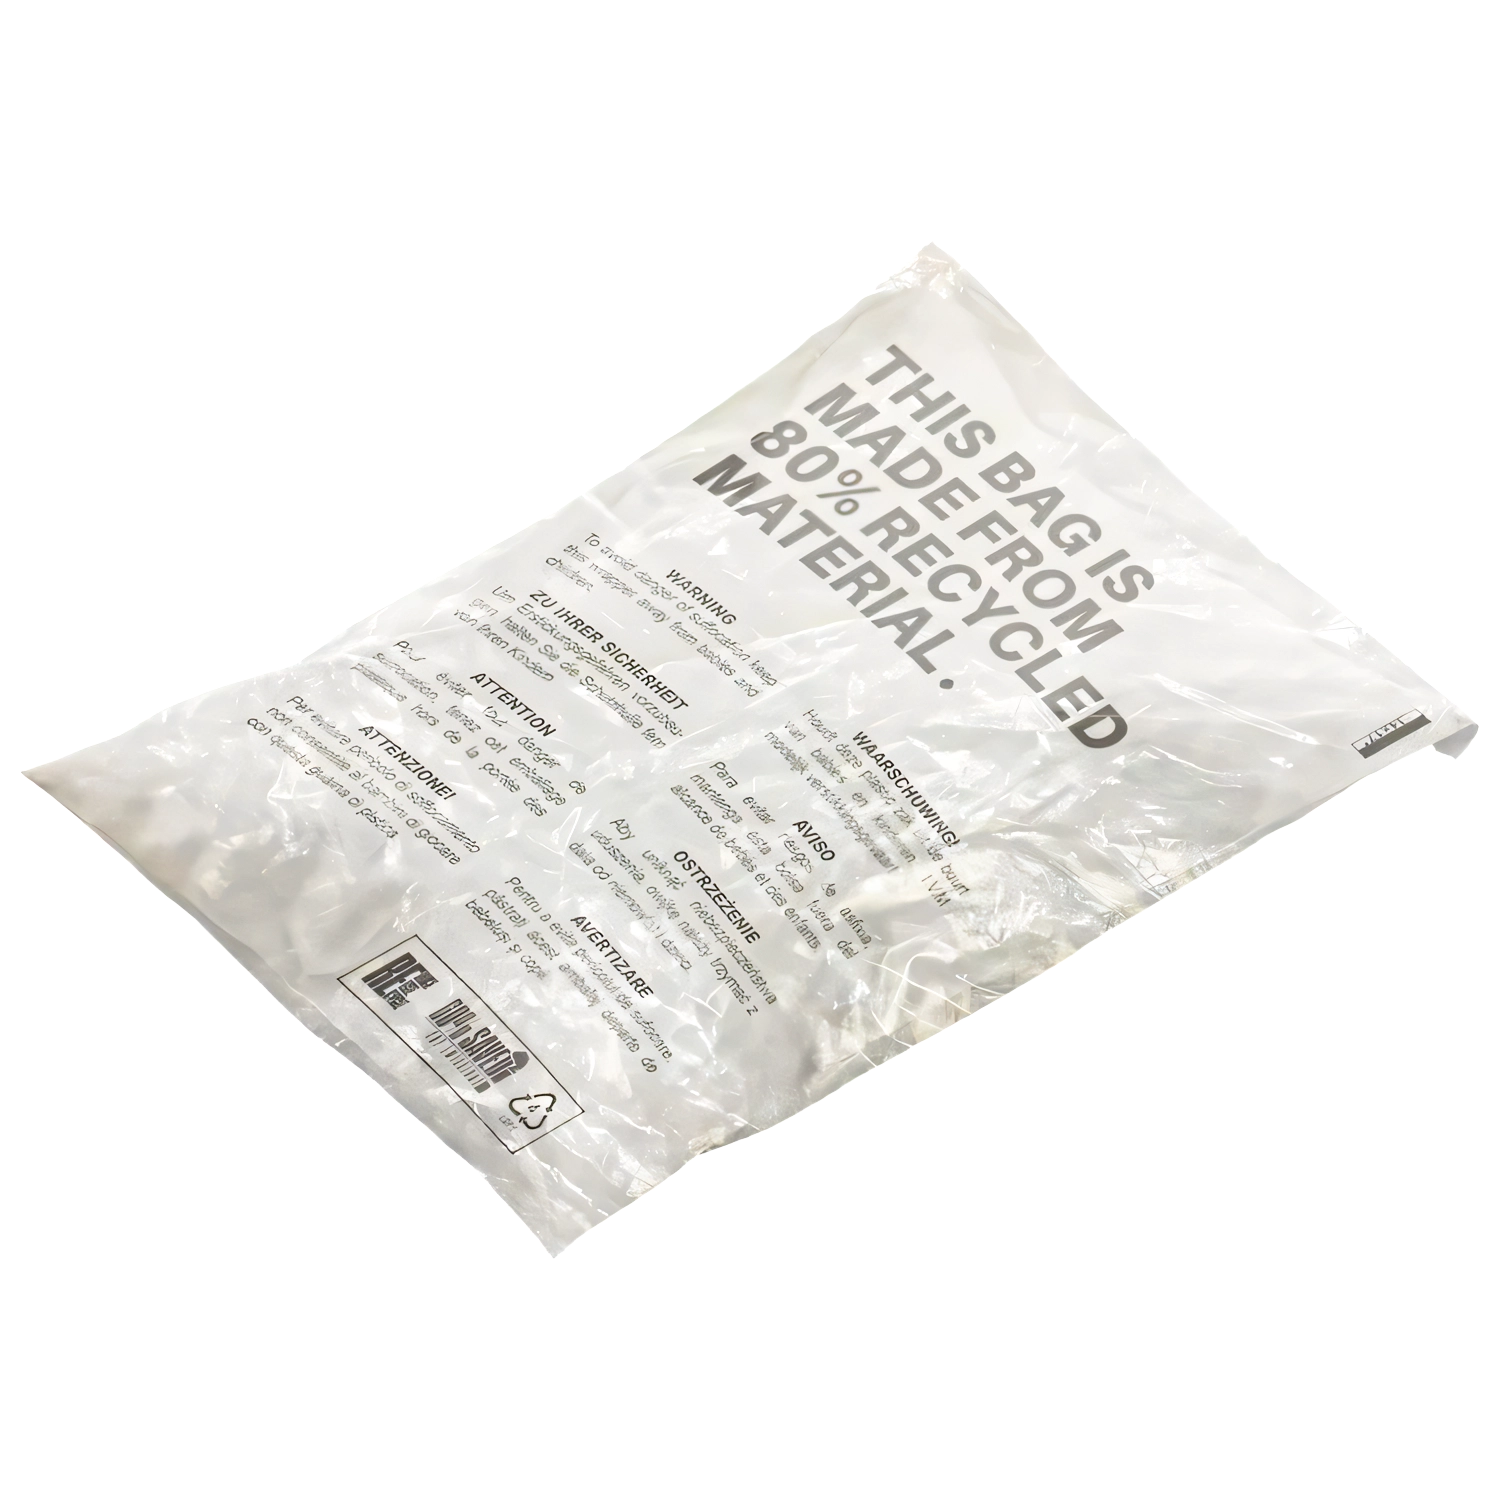 80% Recycled PIR LDPE Mailing Bags - Postal Bags 12x16 Inch